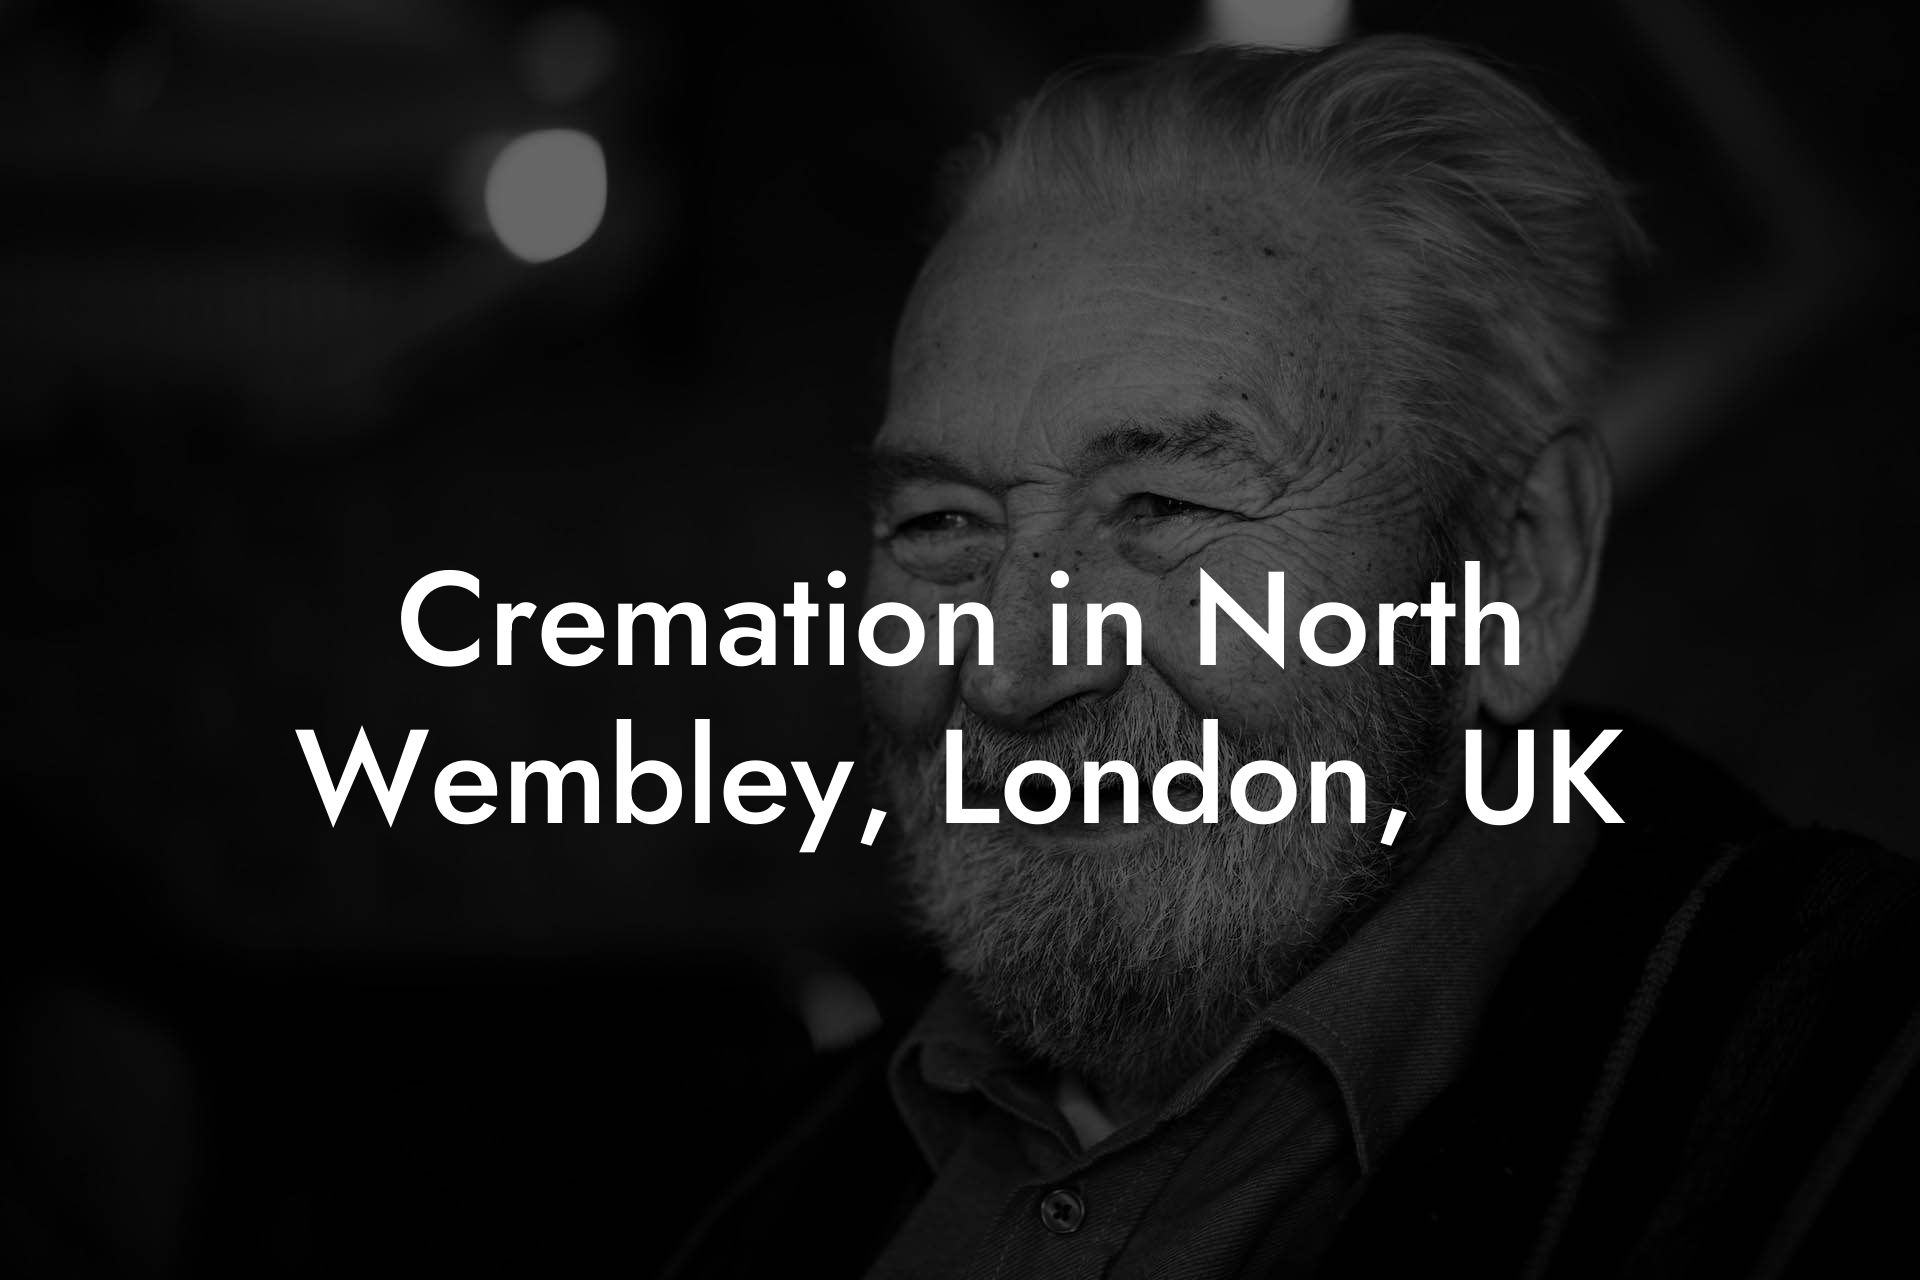 Cremation in North Wembley, London, UK